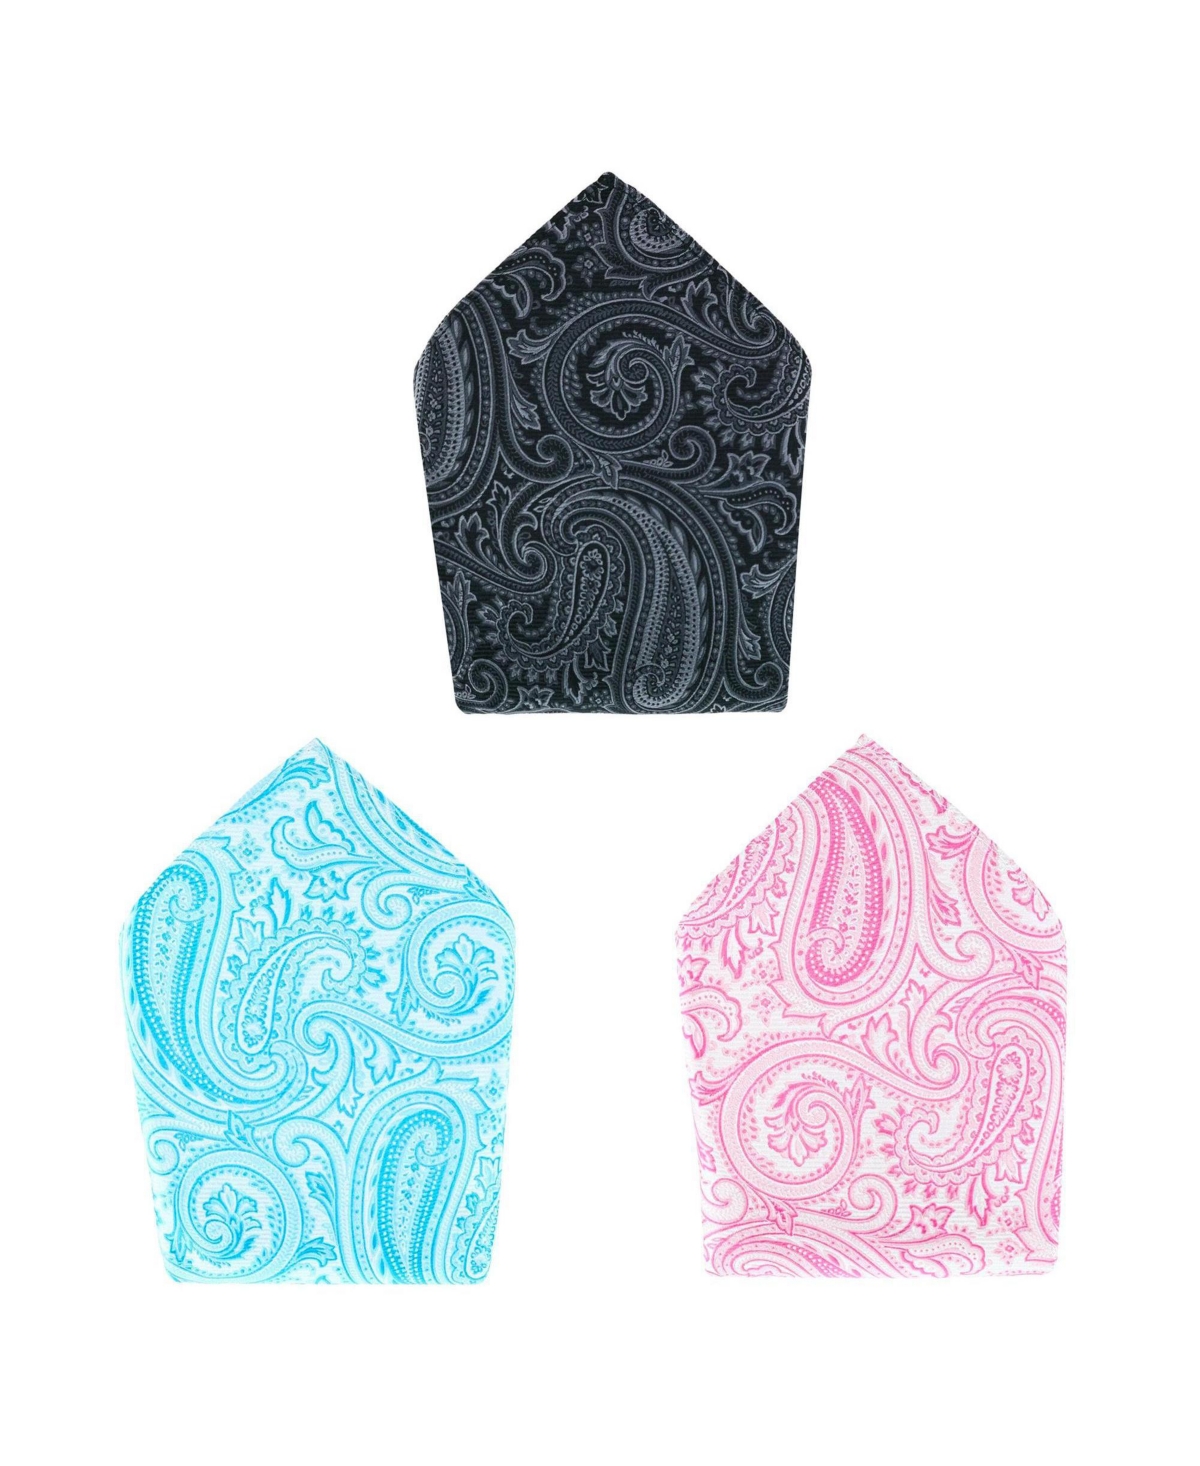 Men's Sobee Collection 12-inch Silk Pocket Square Trio 3 Pack - Black, light blue, pink paisley